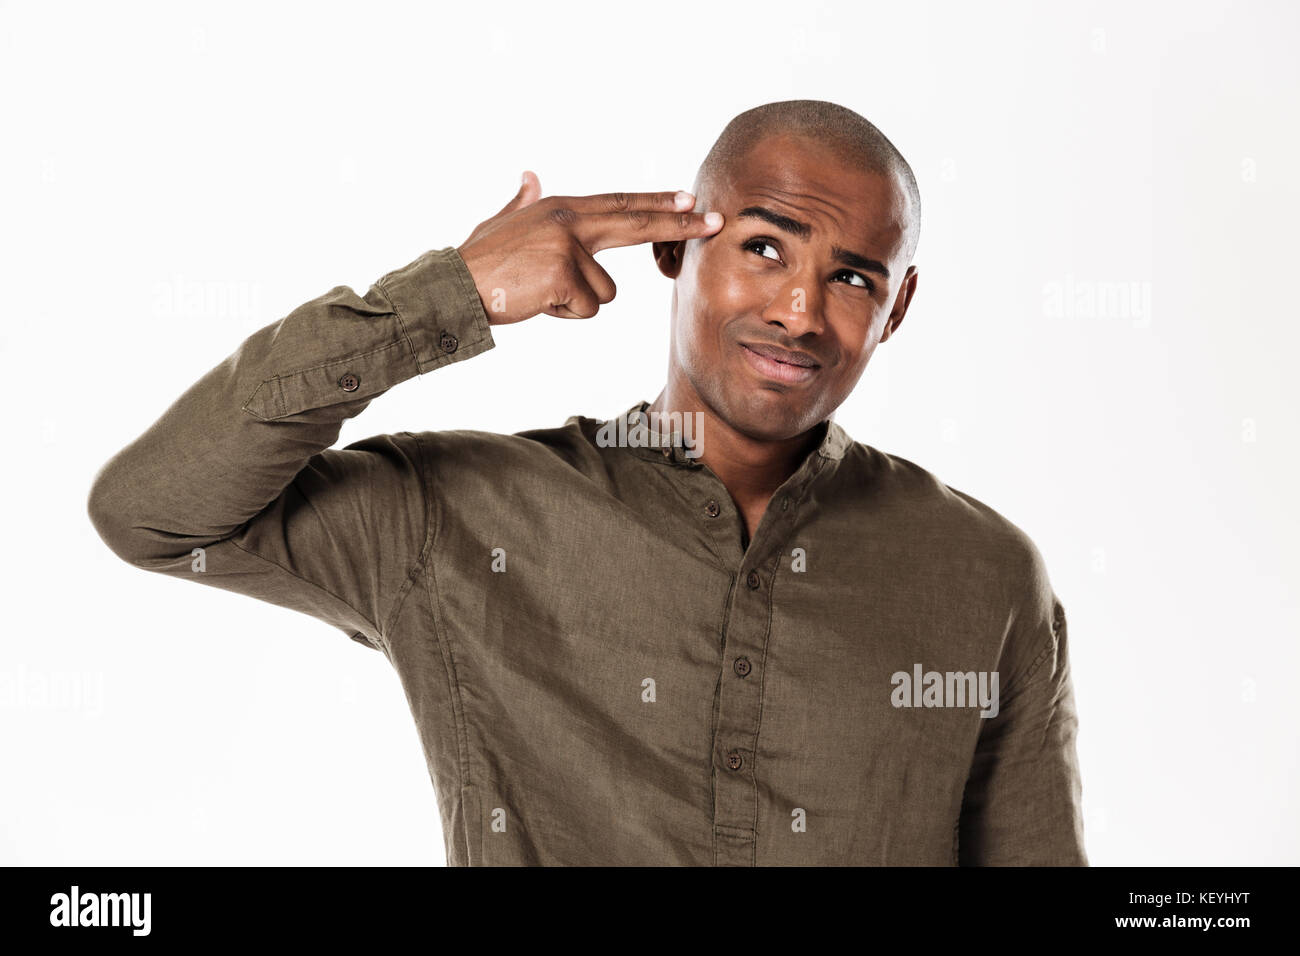 Handsome african man holding arm in gun gesture near the head and looking away over white background Stock Photo